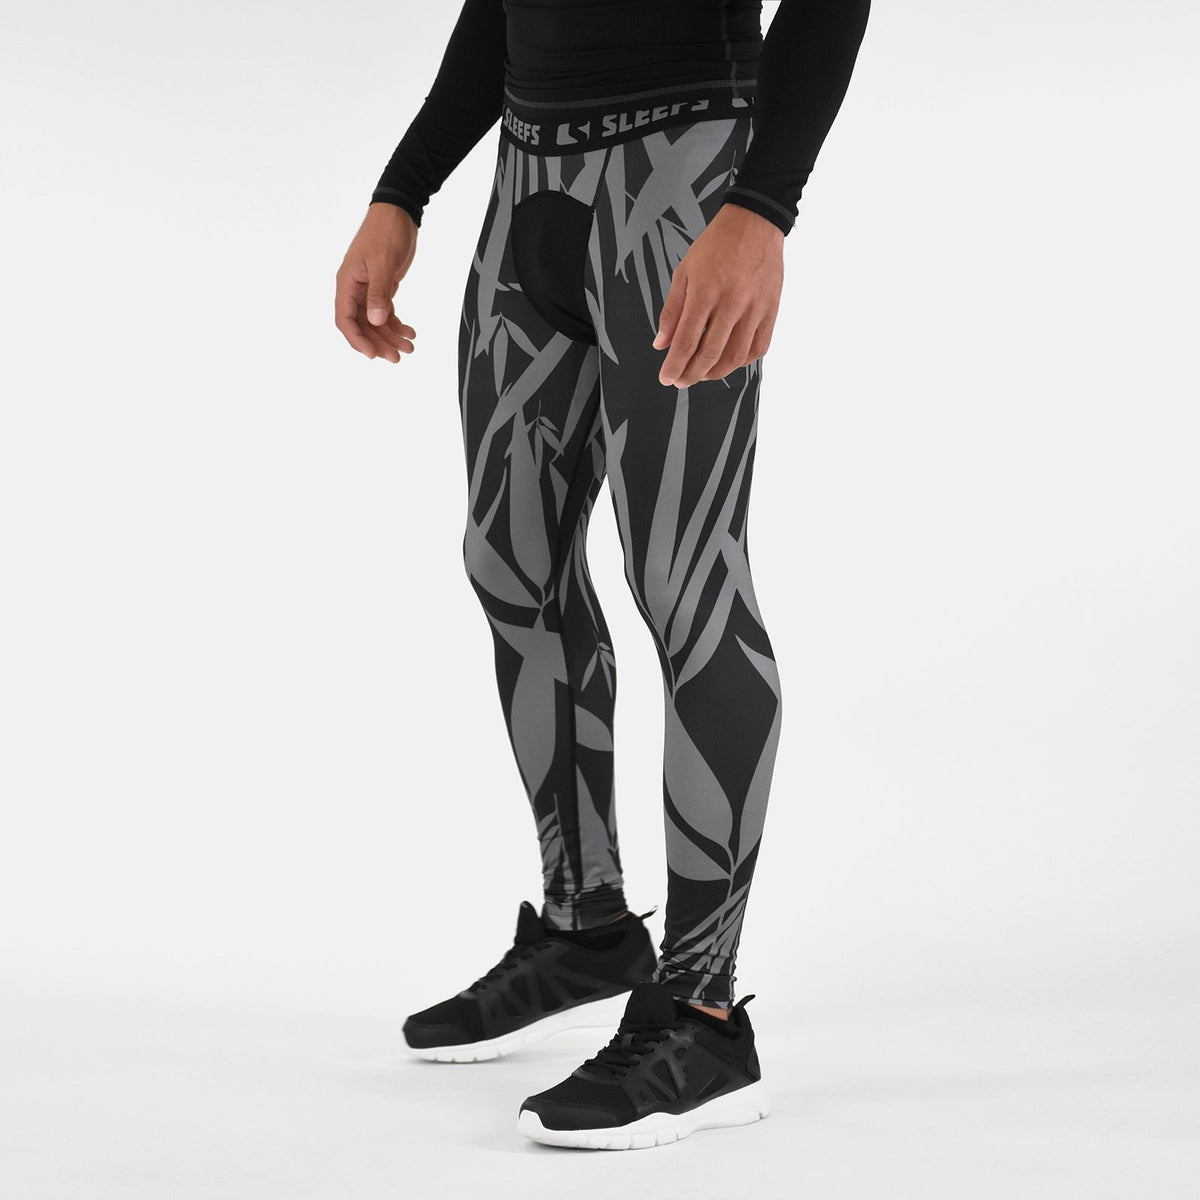 Bamboo Black OPS compression tights / leggings – timur-test-store